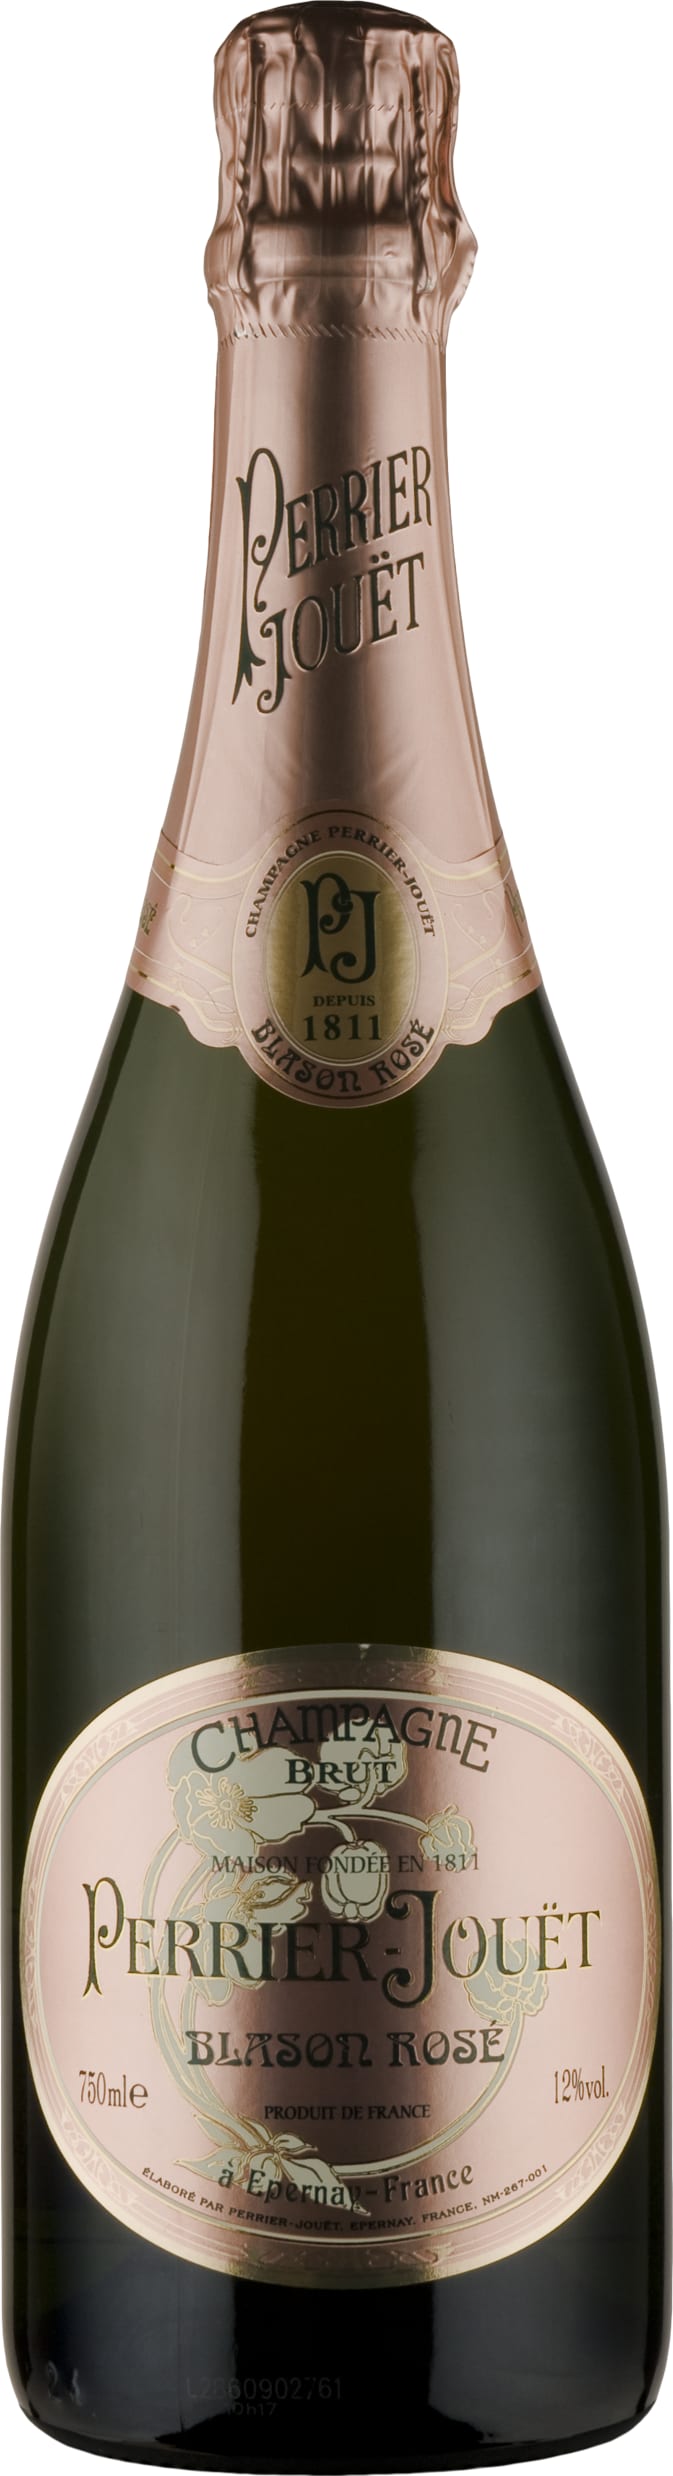 Perrier-Jouet Champagne Blason Rose Brut 75cl NV - Buy Perrier-Jouet Wines from GREAT WINES DIRECT wine shop